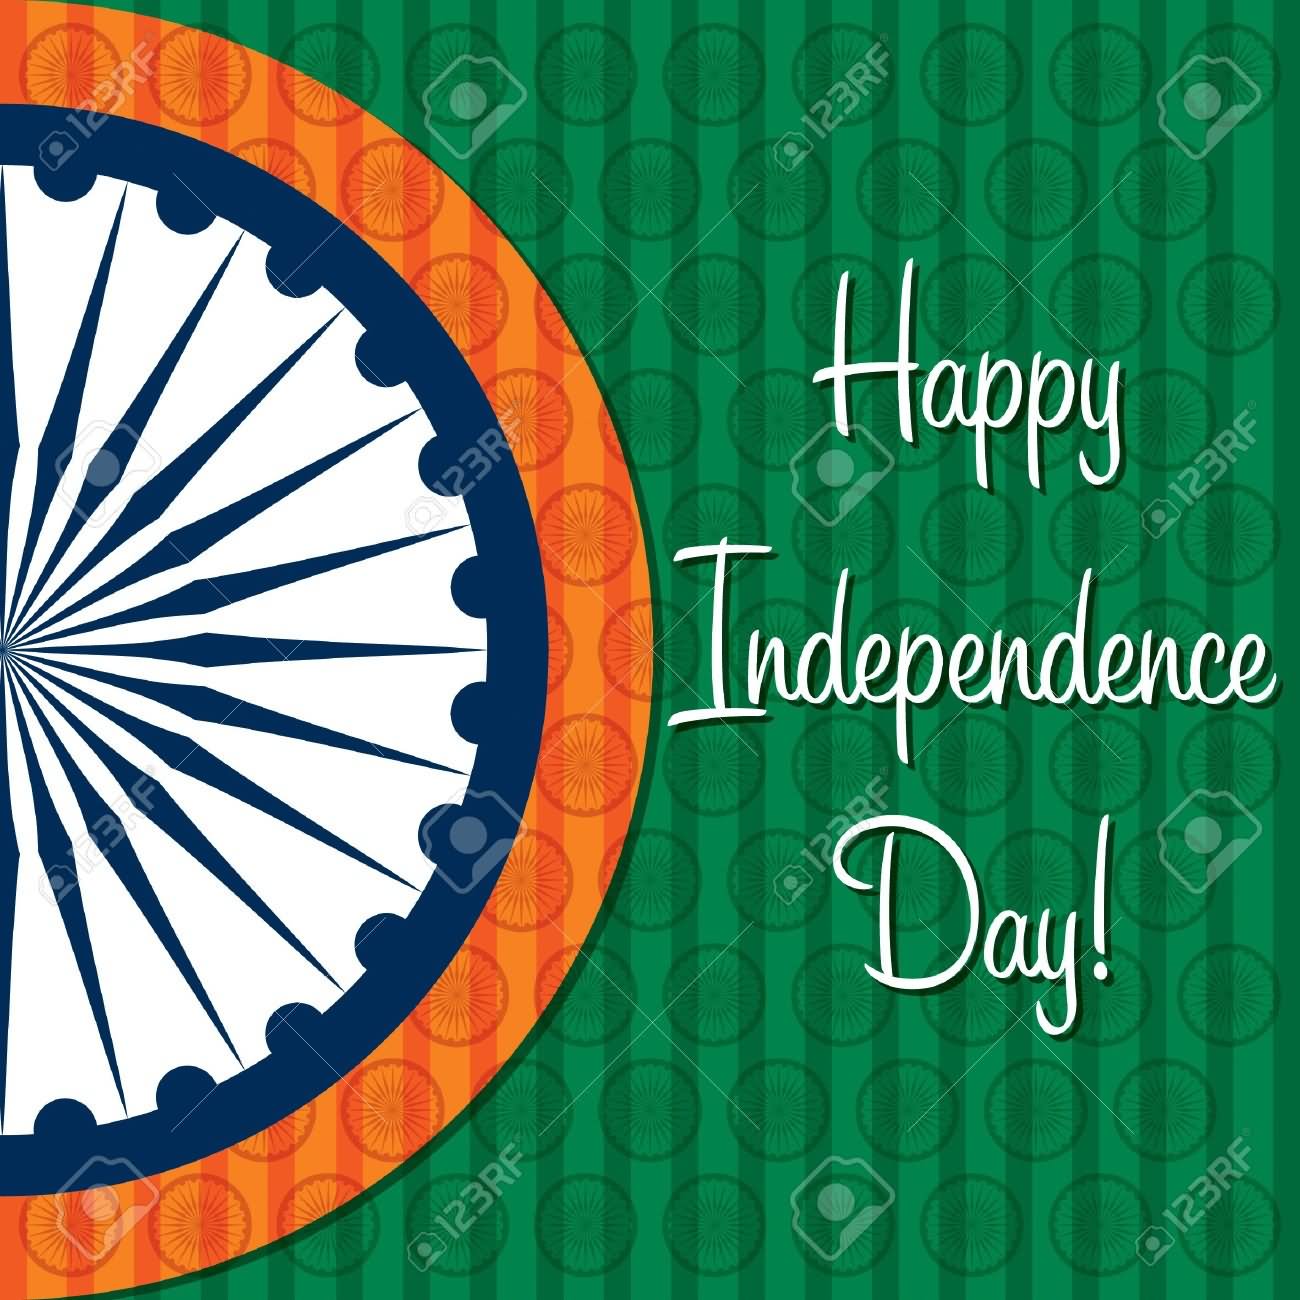 Happy Independence Day Beautiful Greeting Card Image